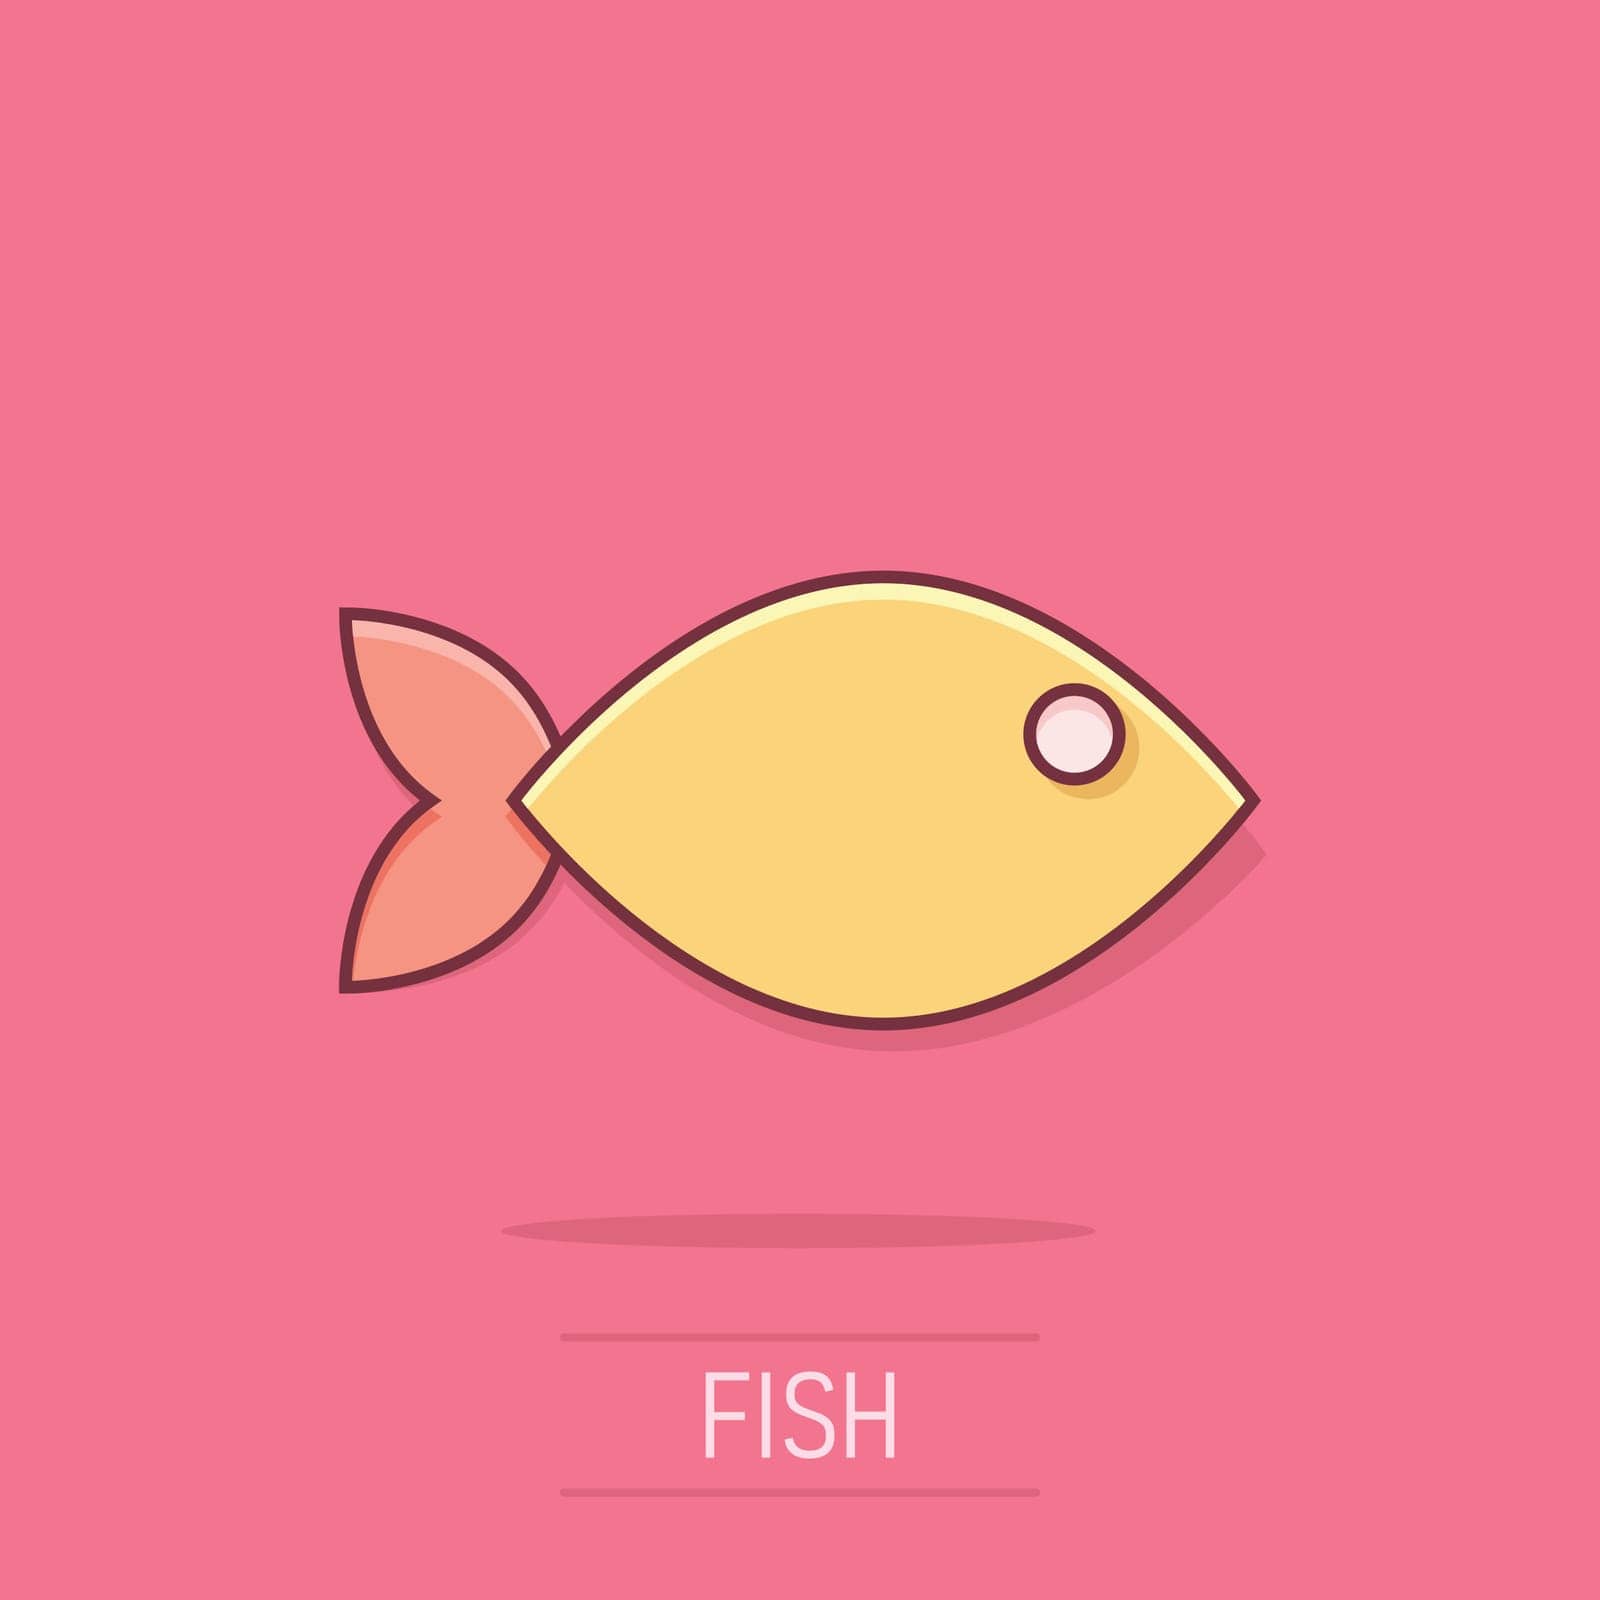 Fish sign icon in comic style. Goldfish vector cartoon illustration on isolated background. Seafood business concept splash effect. by LysenkoA